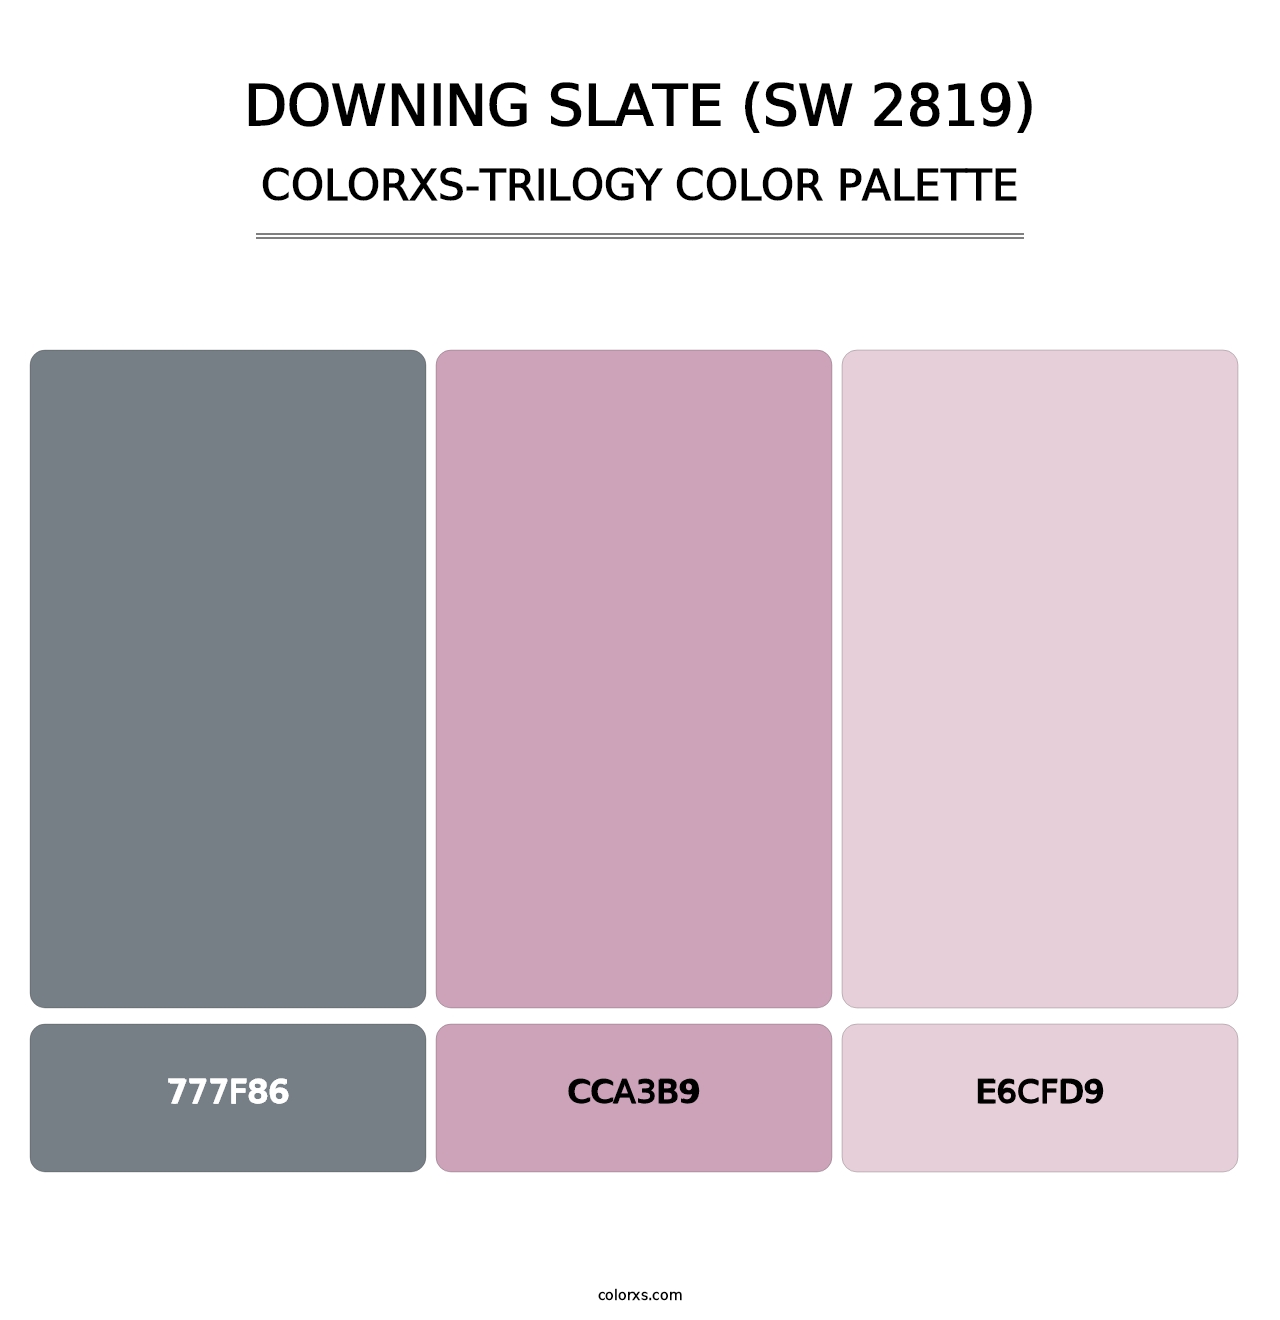 Downing Slate (SW 2819) - Colorxs Trilogy Palette